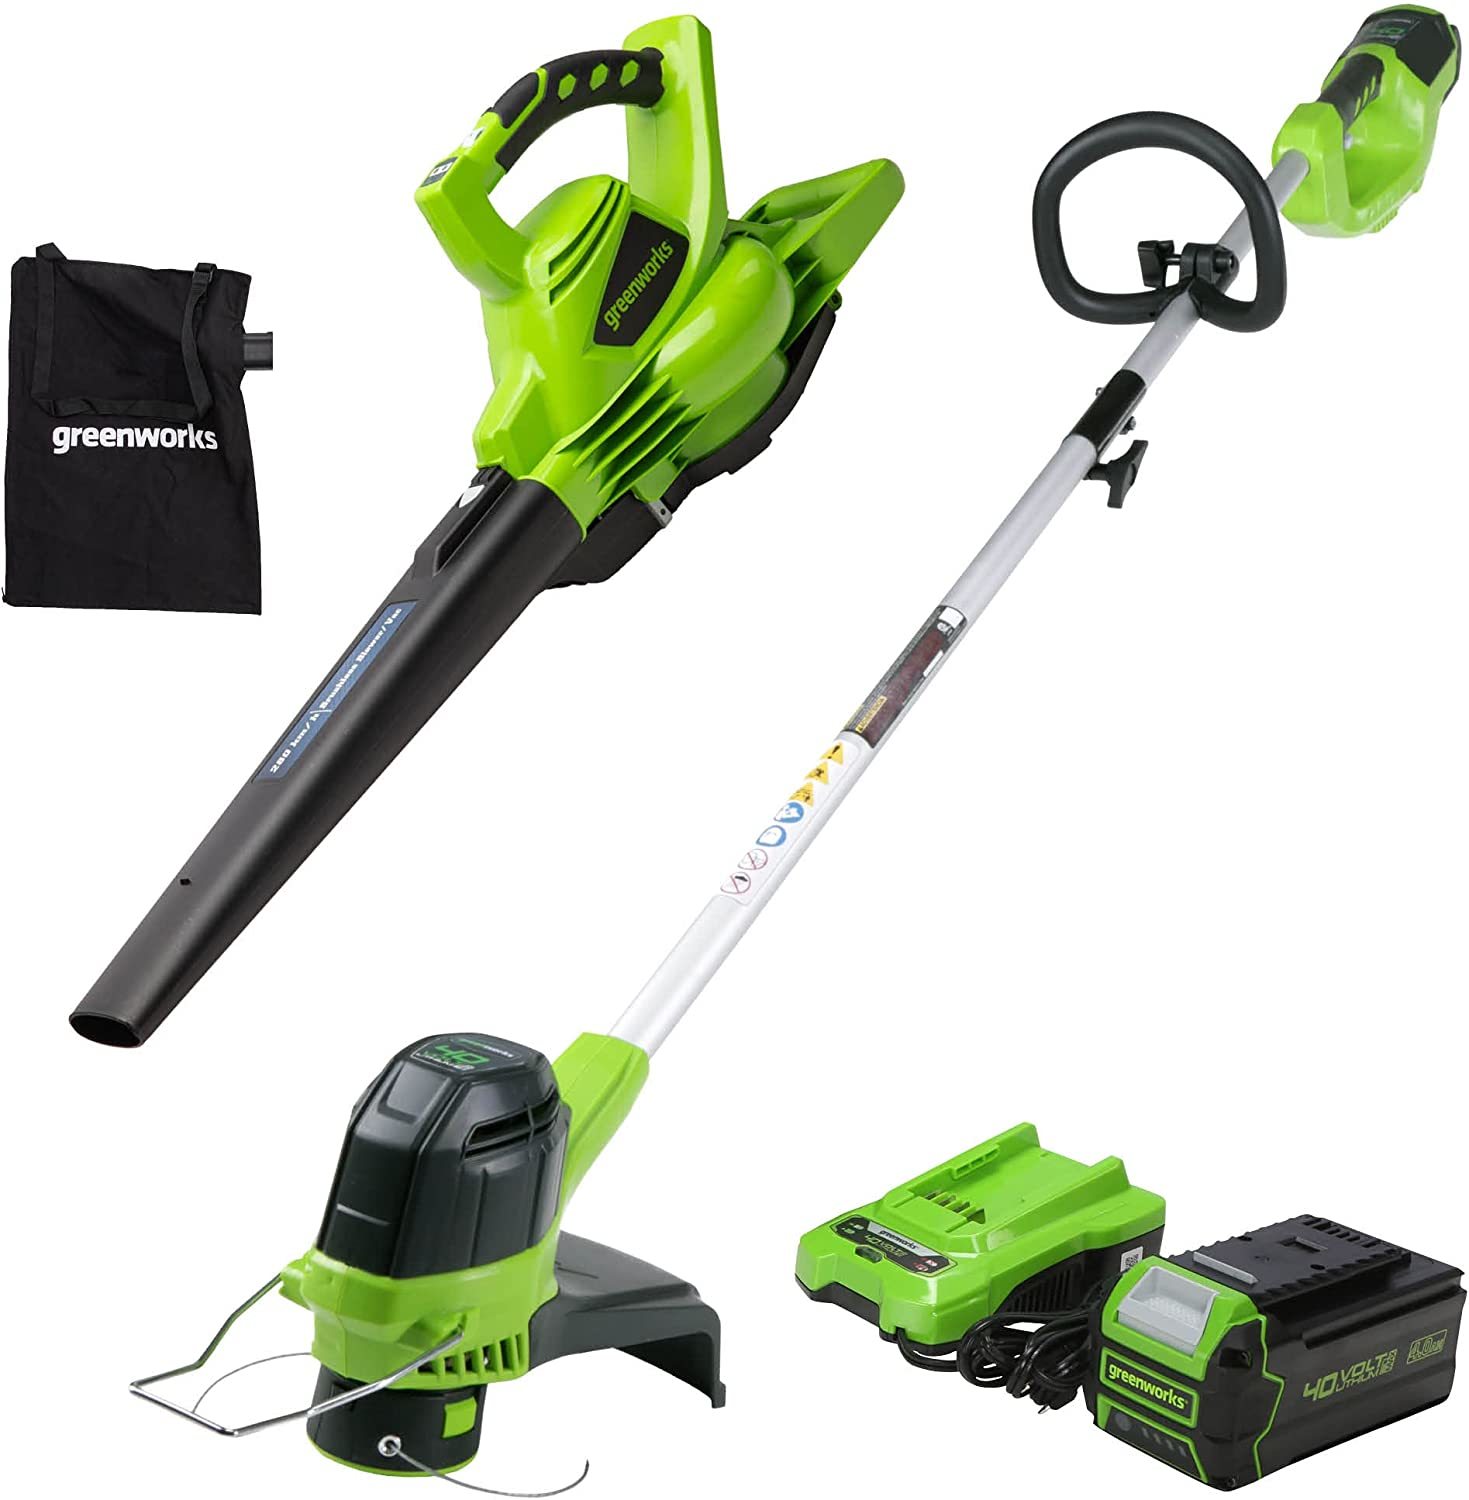 Greenworks Includes A 12-Inch Cordless String Trimmer And A 40-Volt Leaf - $415.92